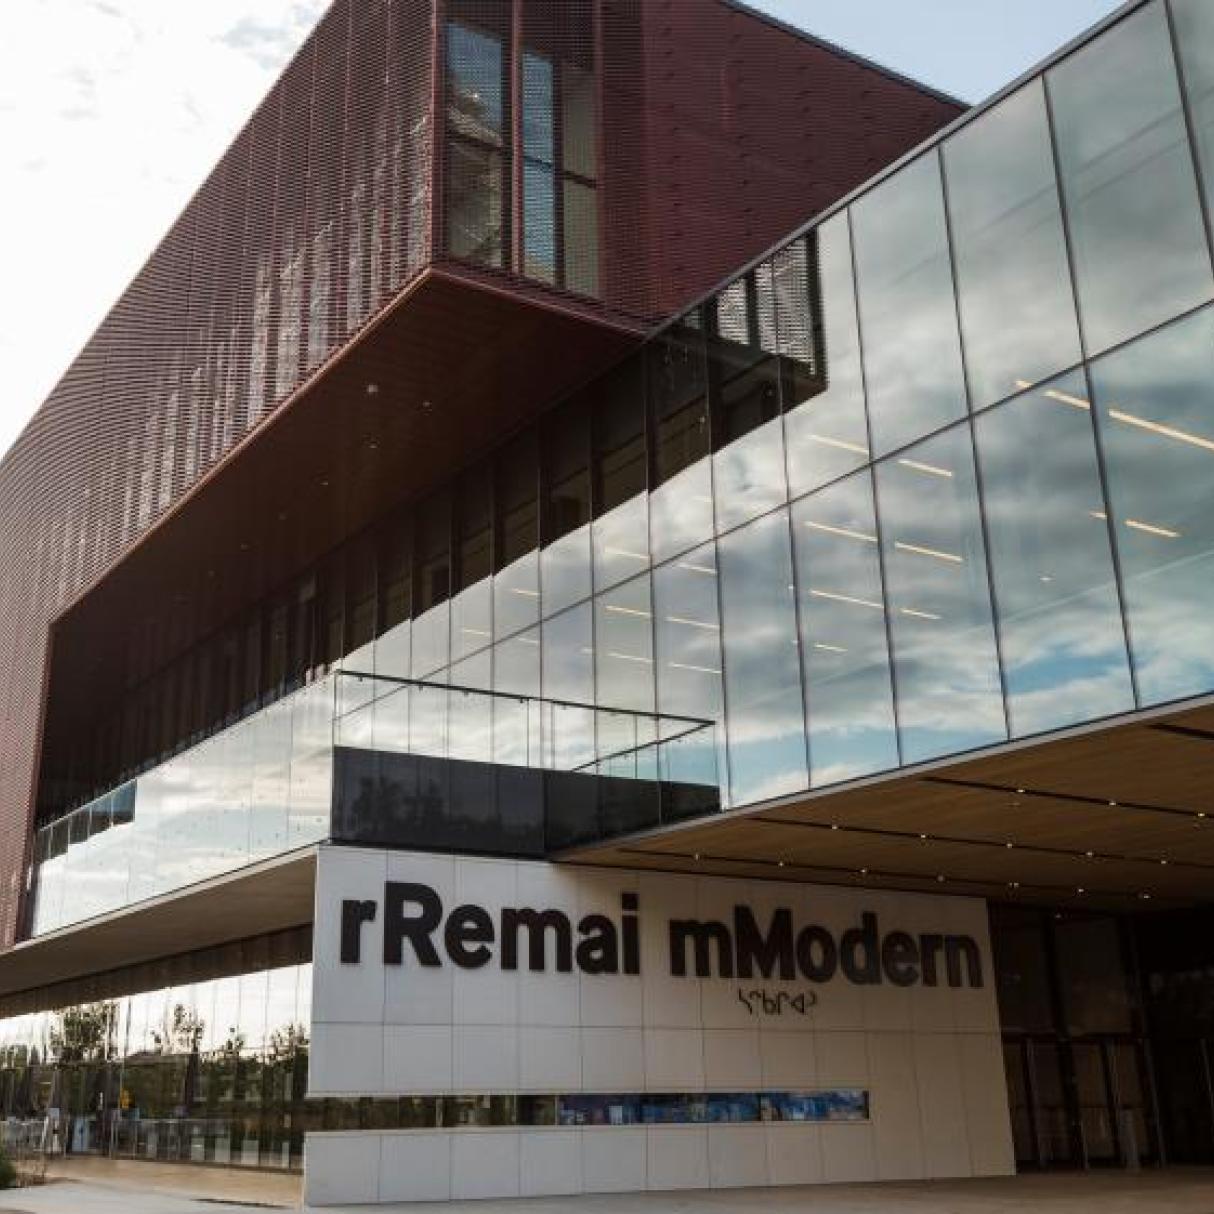 The exterior of the Remai Modern museum